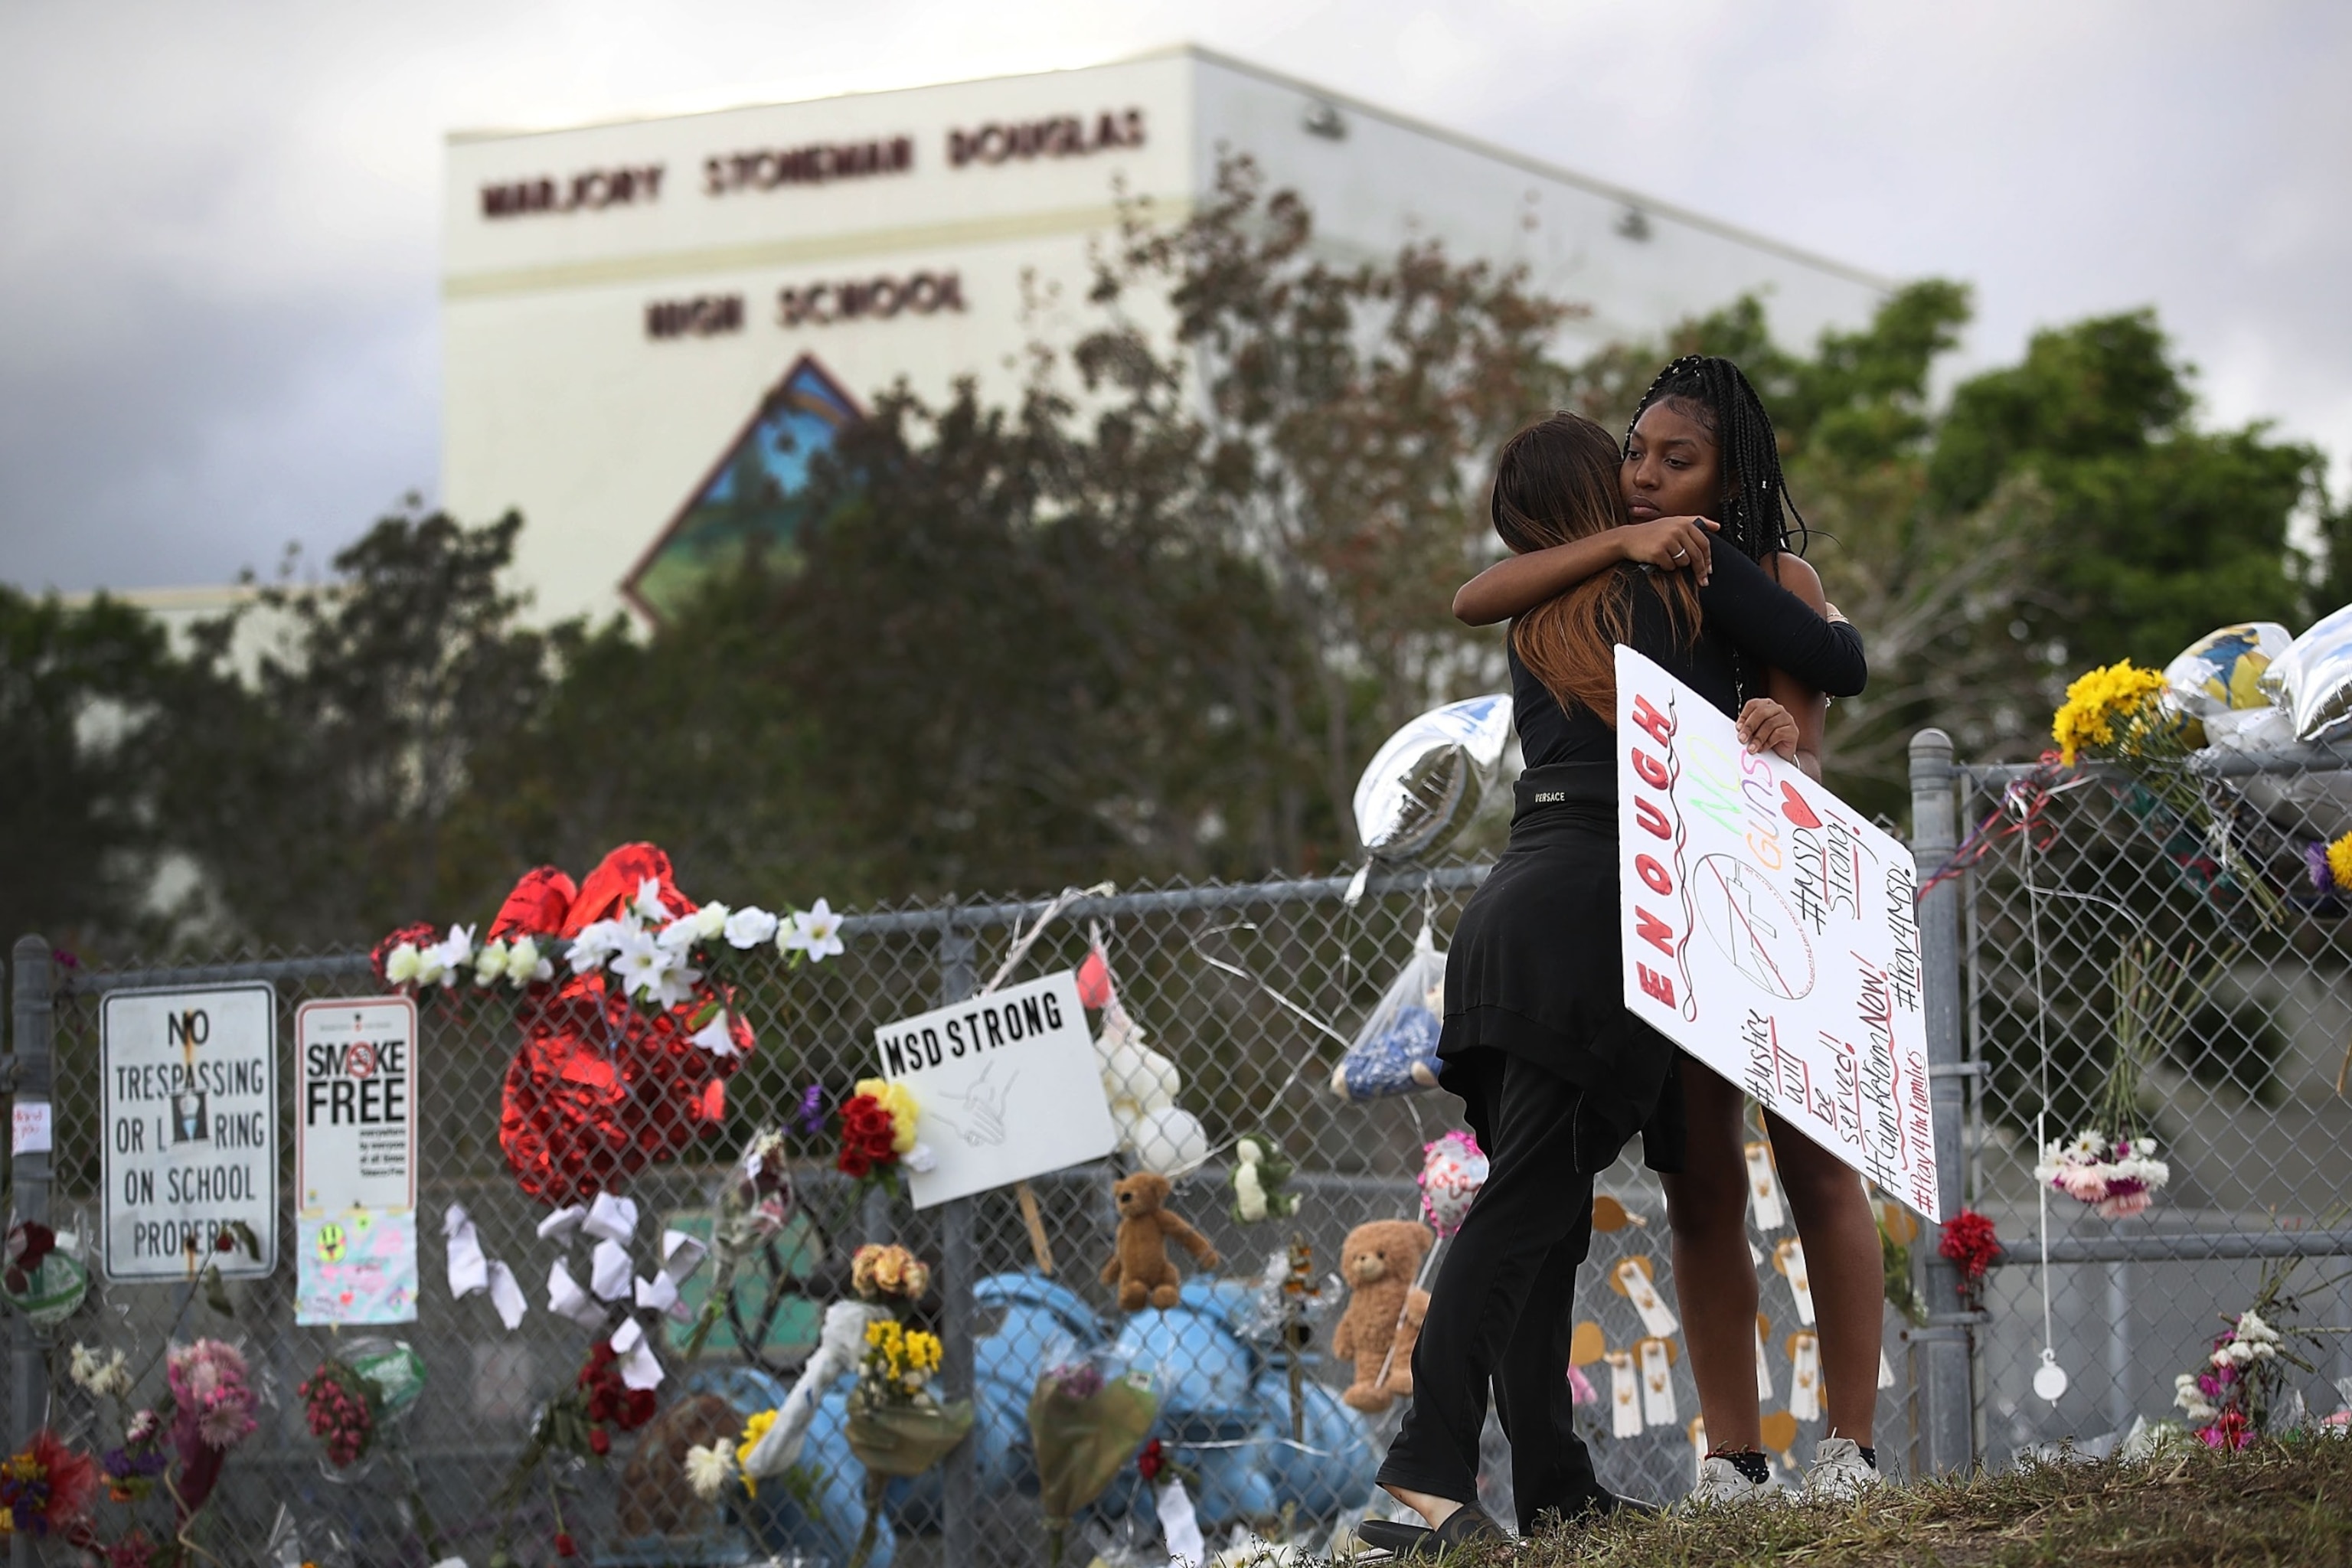 PHOTO: Tyra Heman (R) a senior at Marjory Stoneman Douglas High School, is hugged by Rachael Buto in front of the school where 17 people that were killed on February 14, Feb. 19, 2018, in Parkland, Fla.